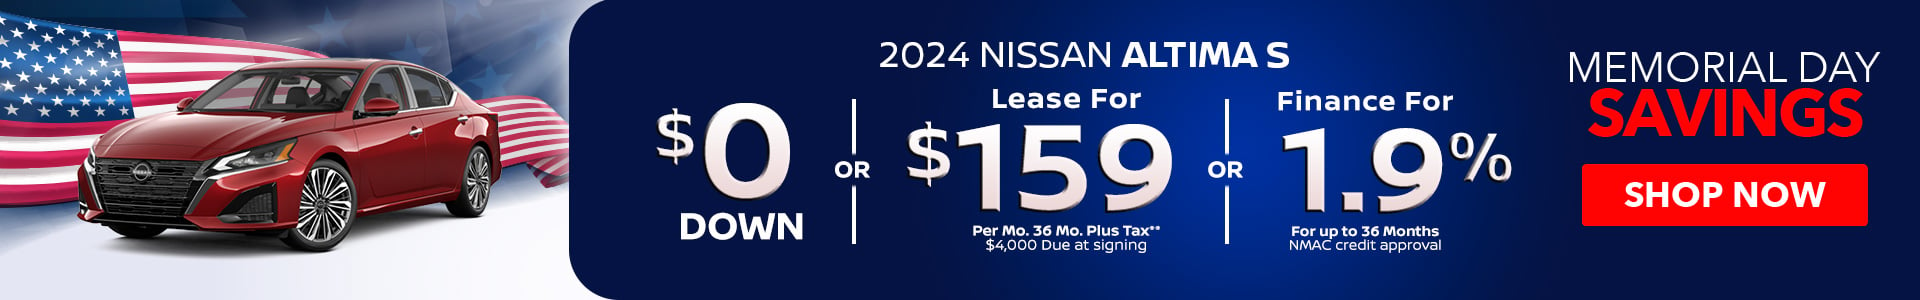 2024 Nissan Altima - Lease for $159